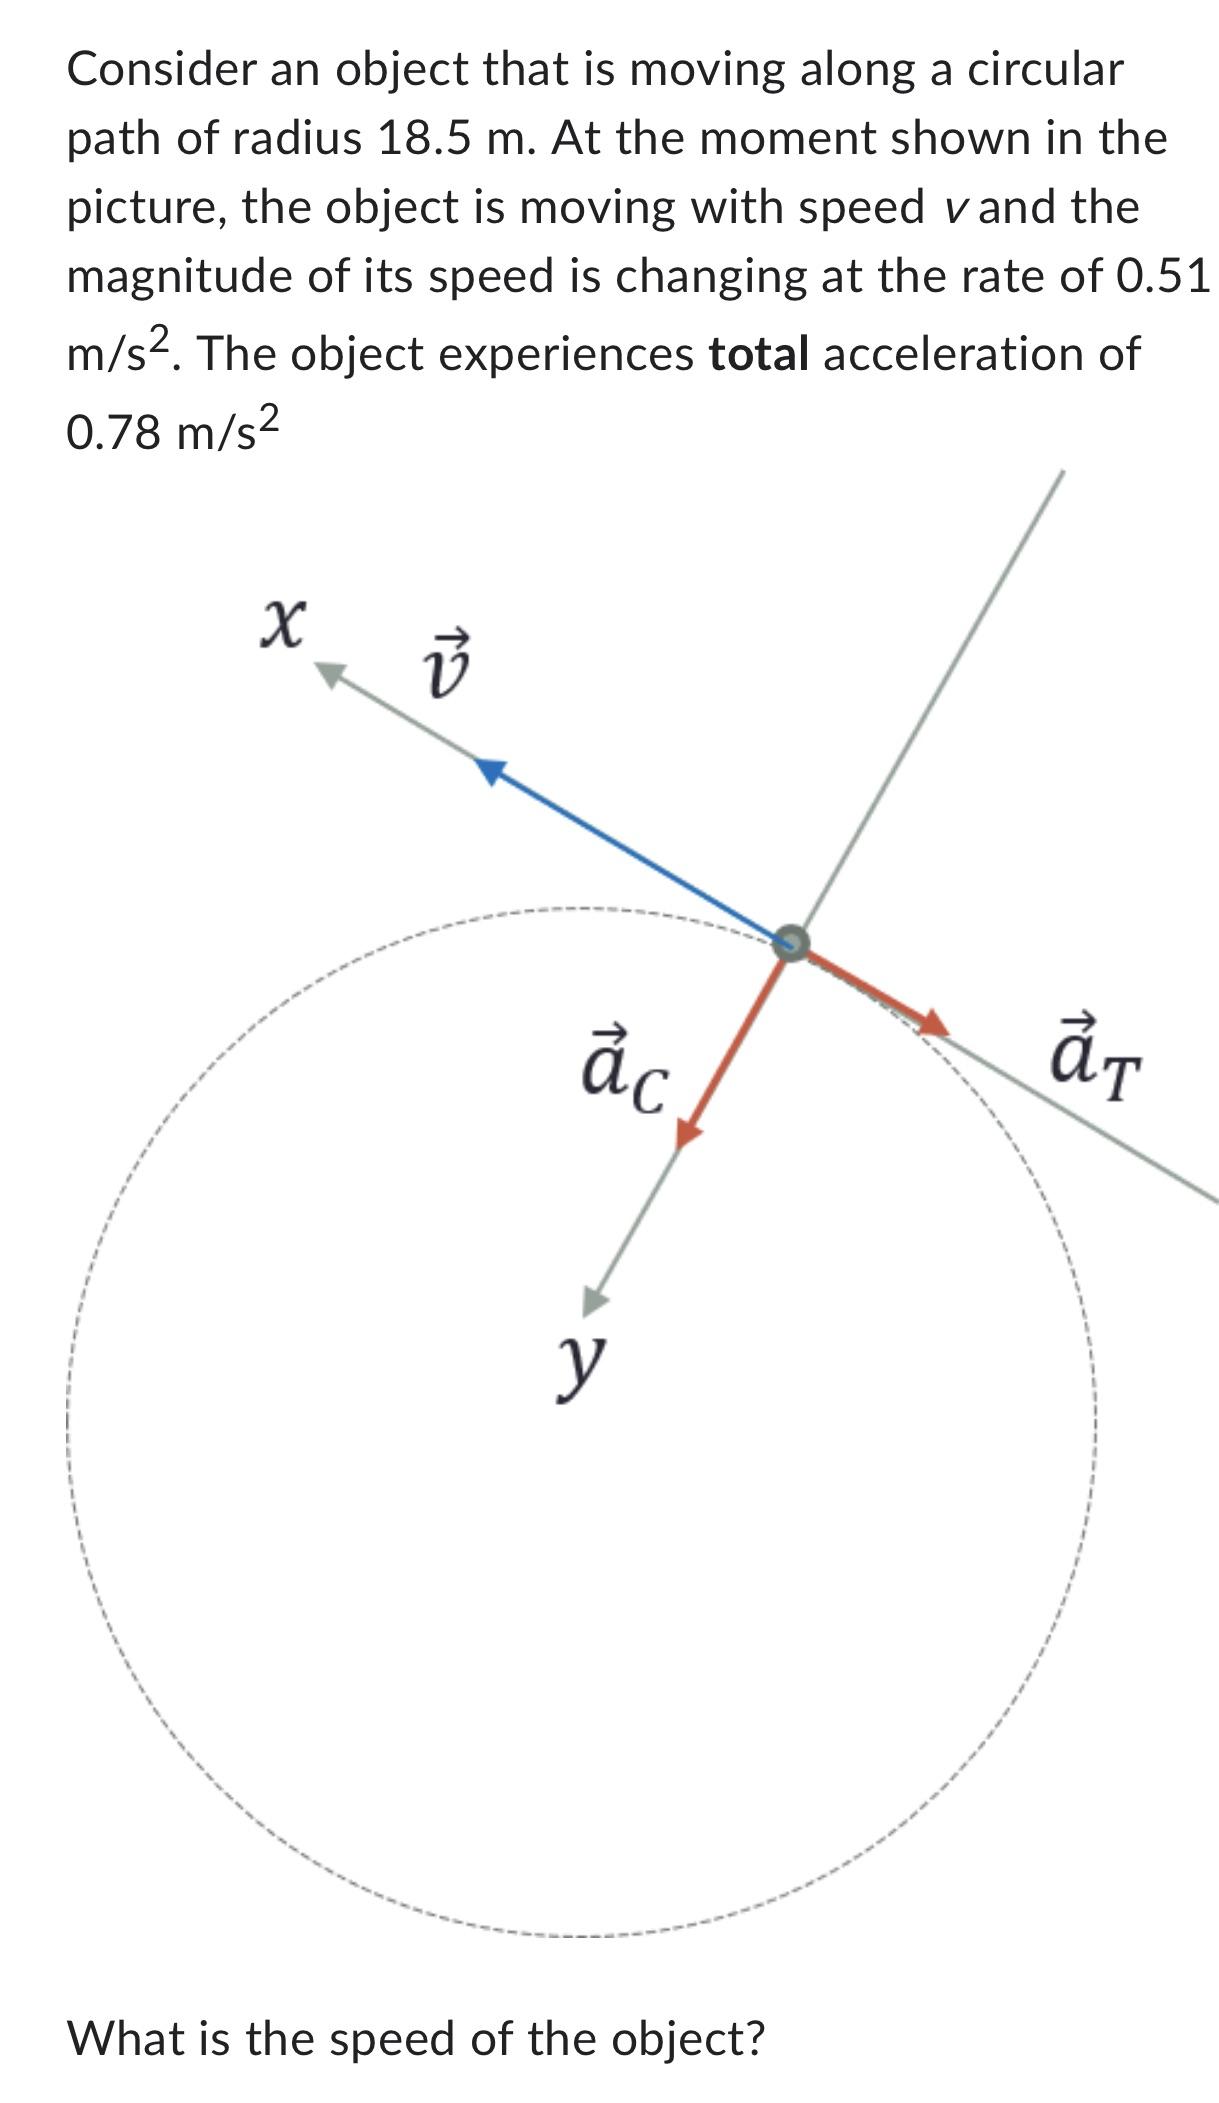 Consider an object that is moving along a circular path of radius 18.5 m. At the moment shown in the picture,